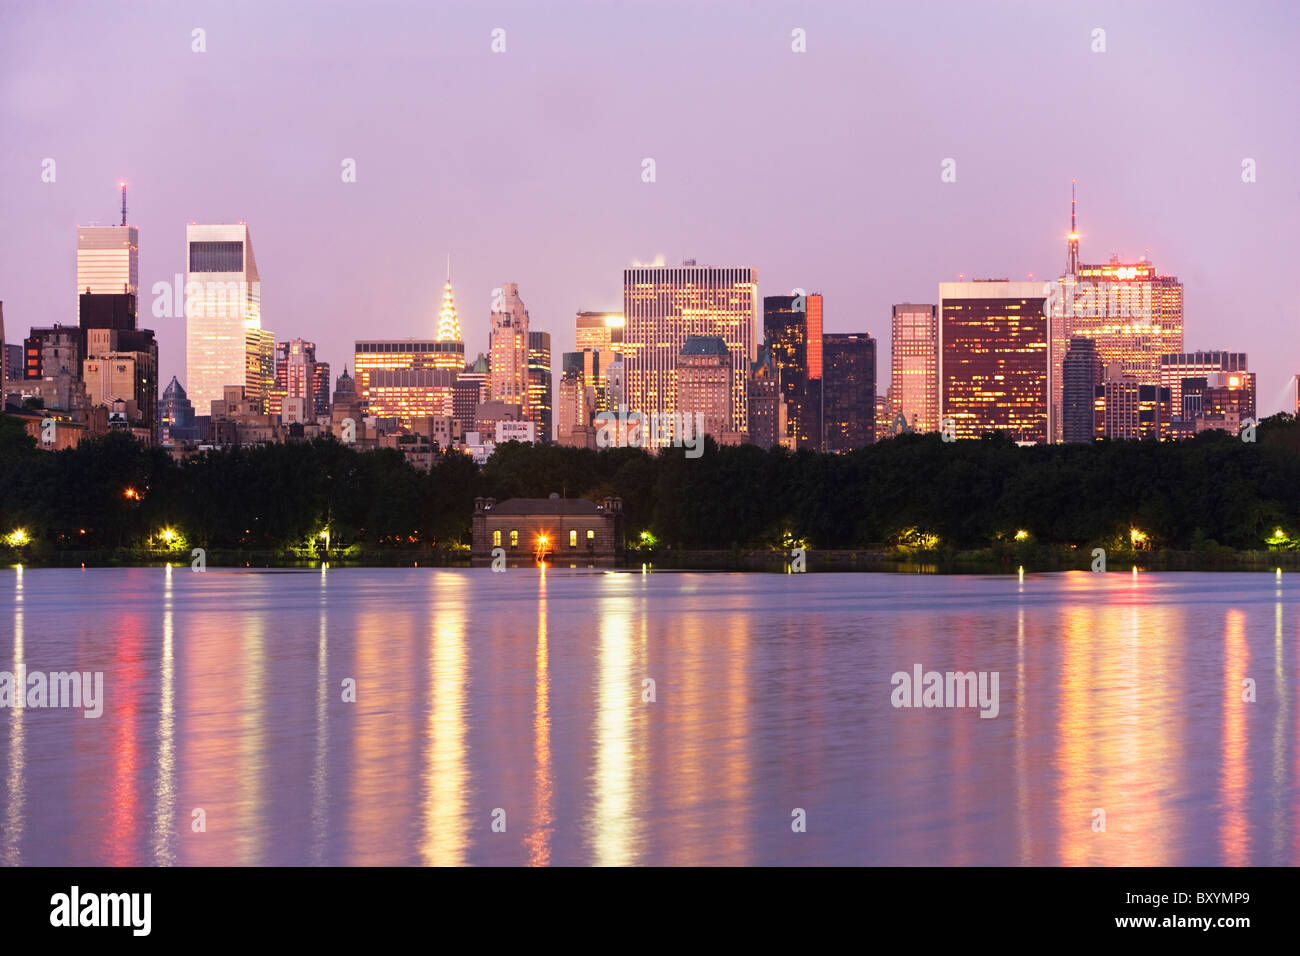 Skyline with Bloomberg Building at dusk, view from Central Park Stock Photo